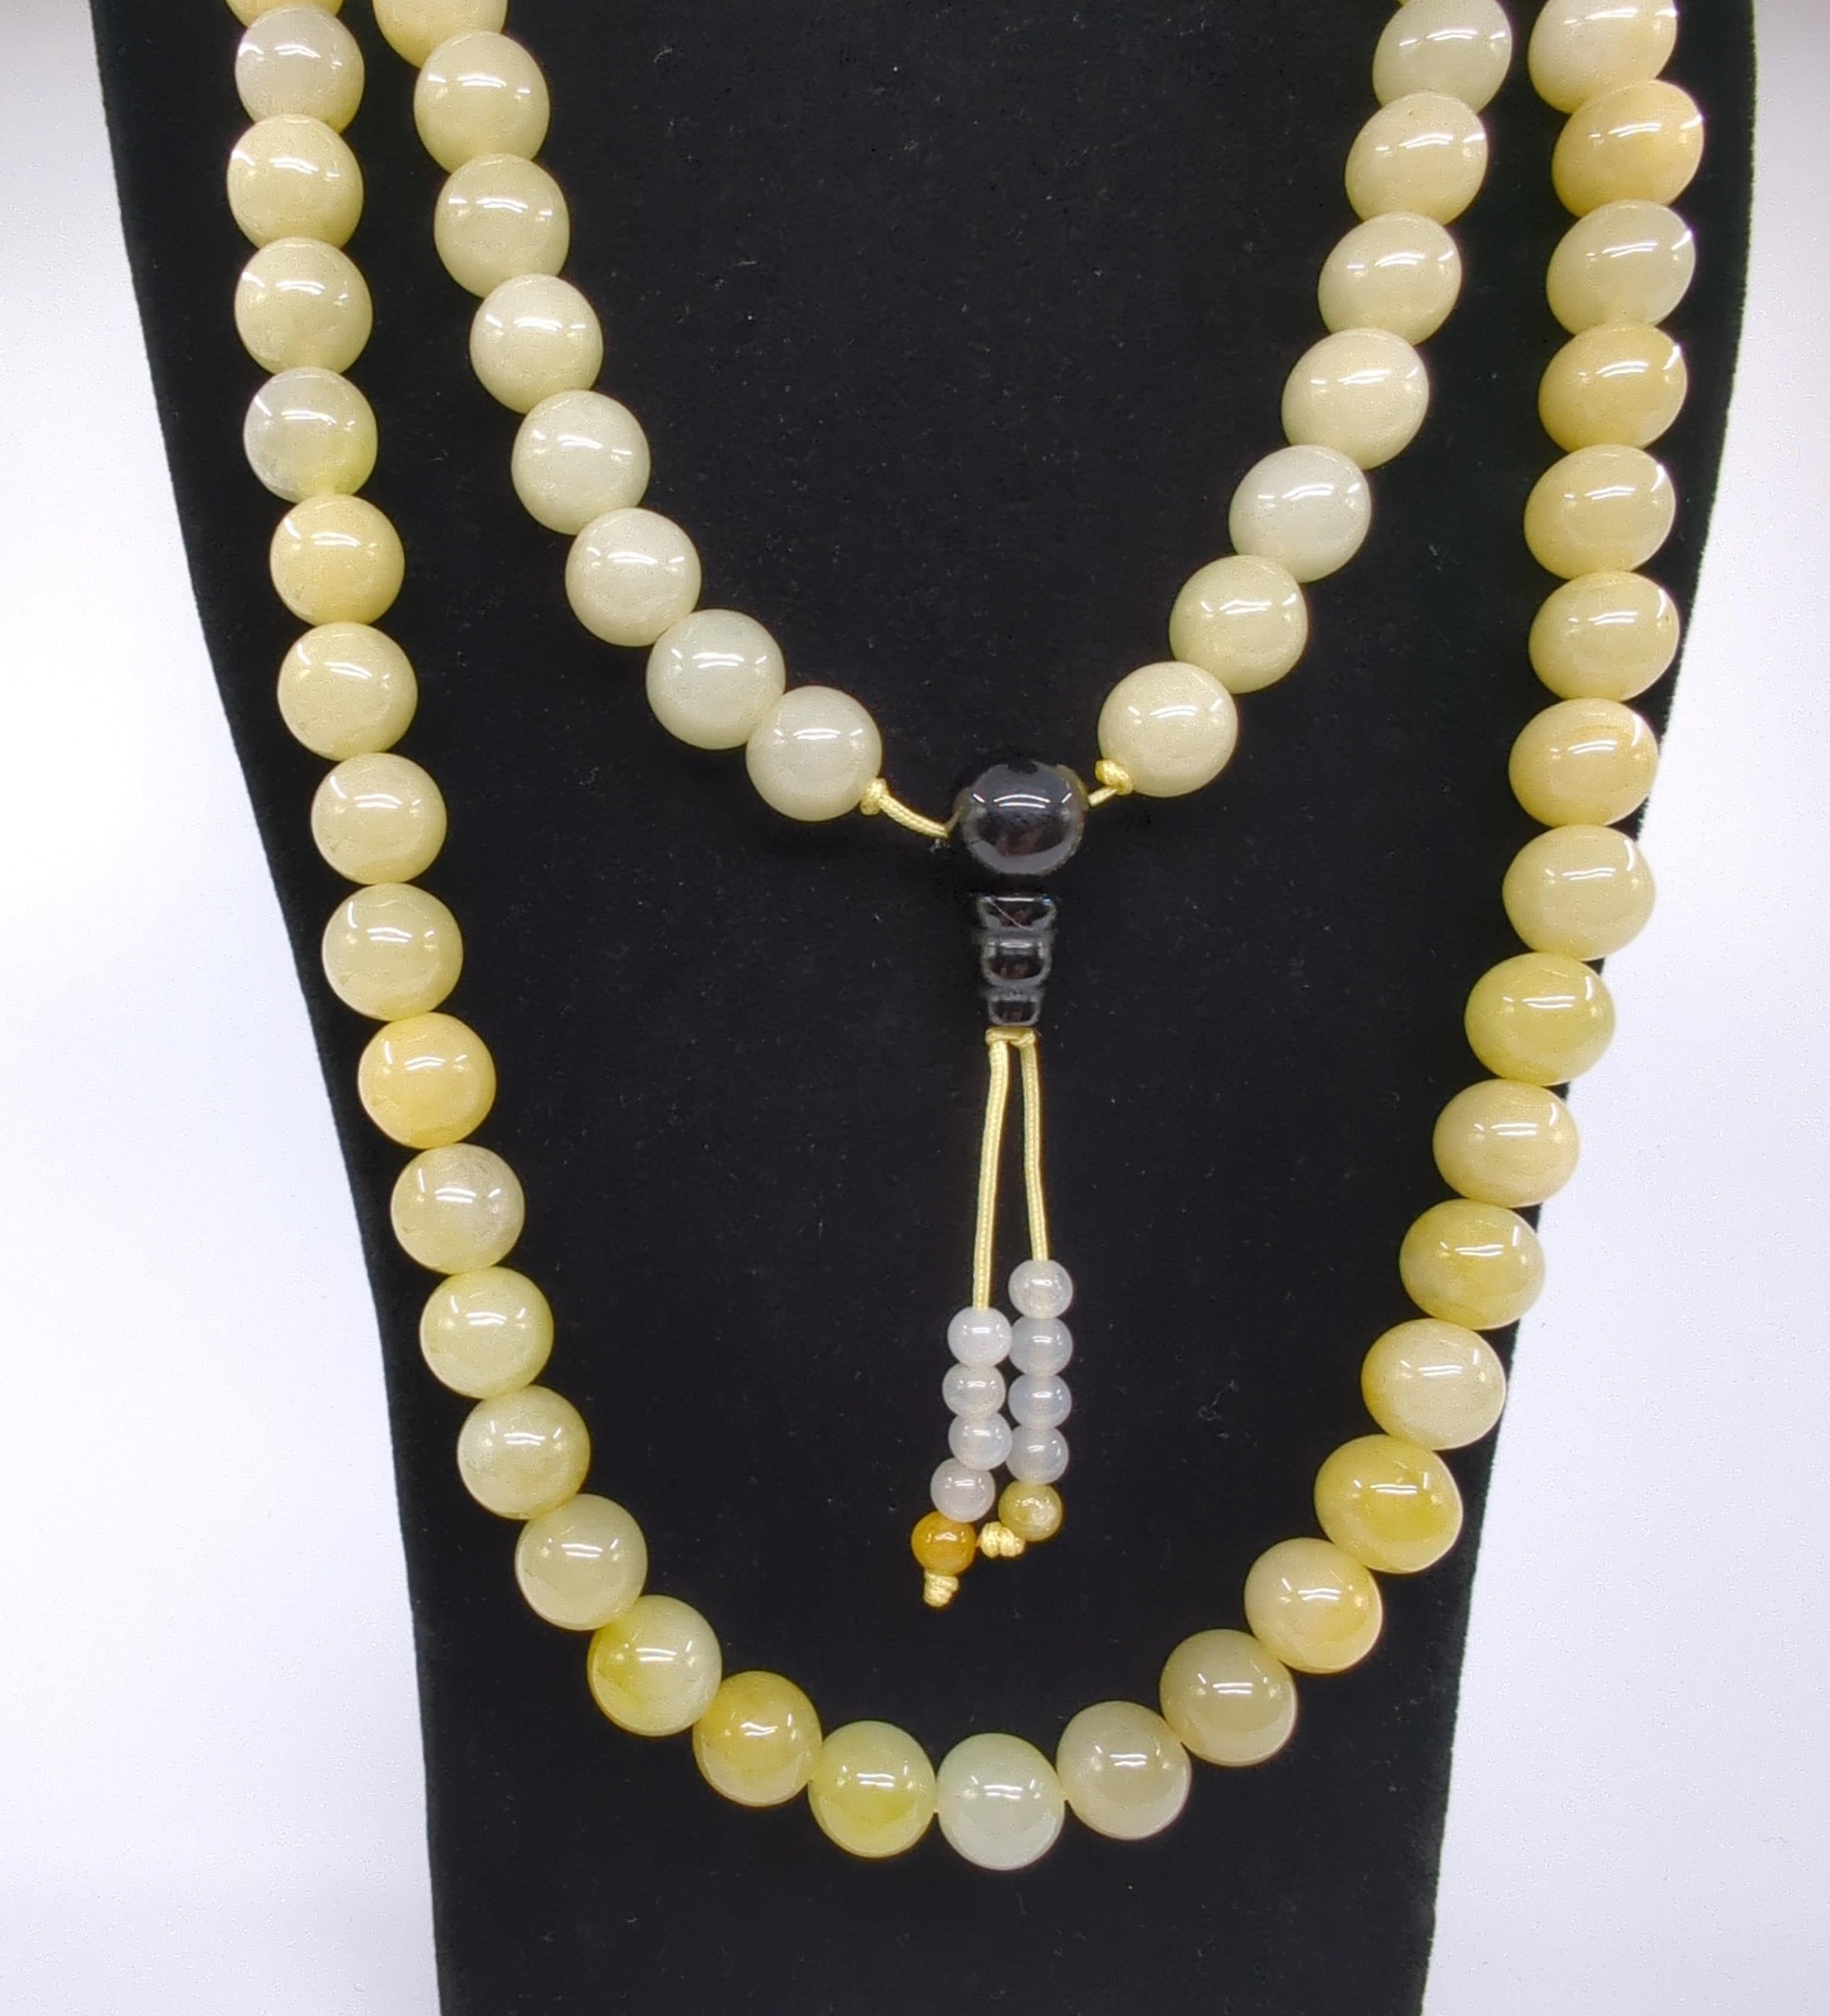 This magnificent Chinese prayer beads necklace is an epitome of artistry and spiritual resonance, featuring 108 A-grade jadeite beads, each with an approximate diameter of 9.5mm. The beads are expertly polished to a high luster, revealing their